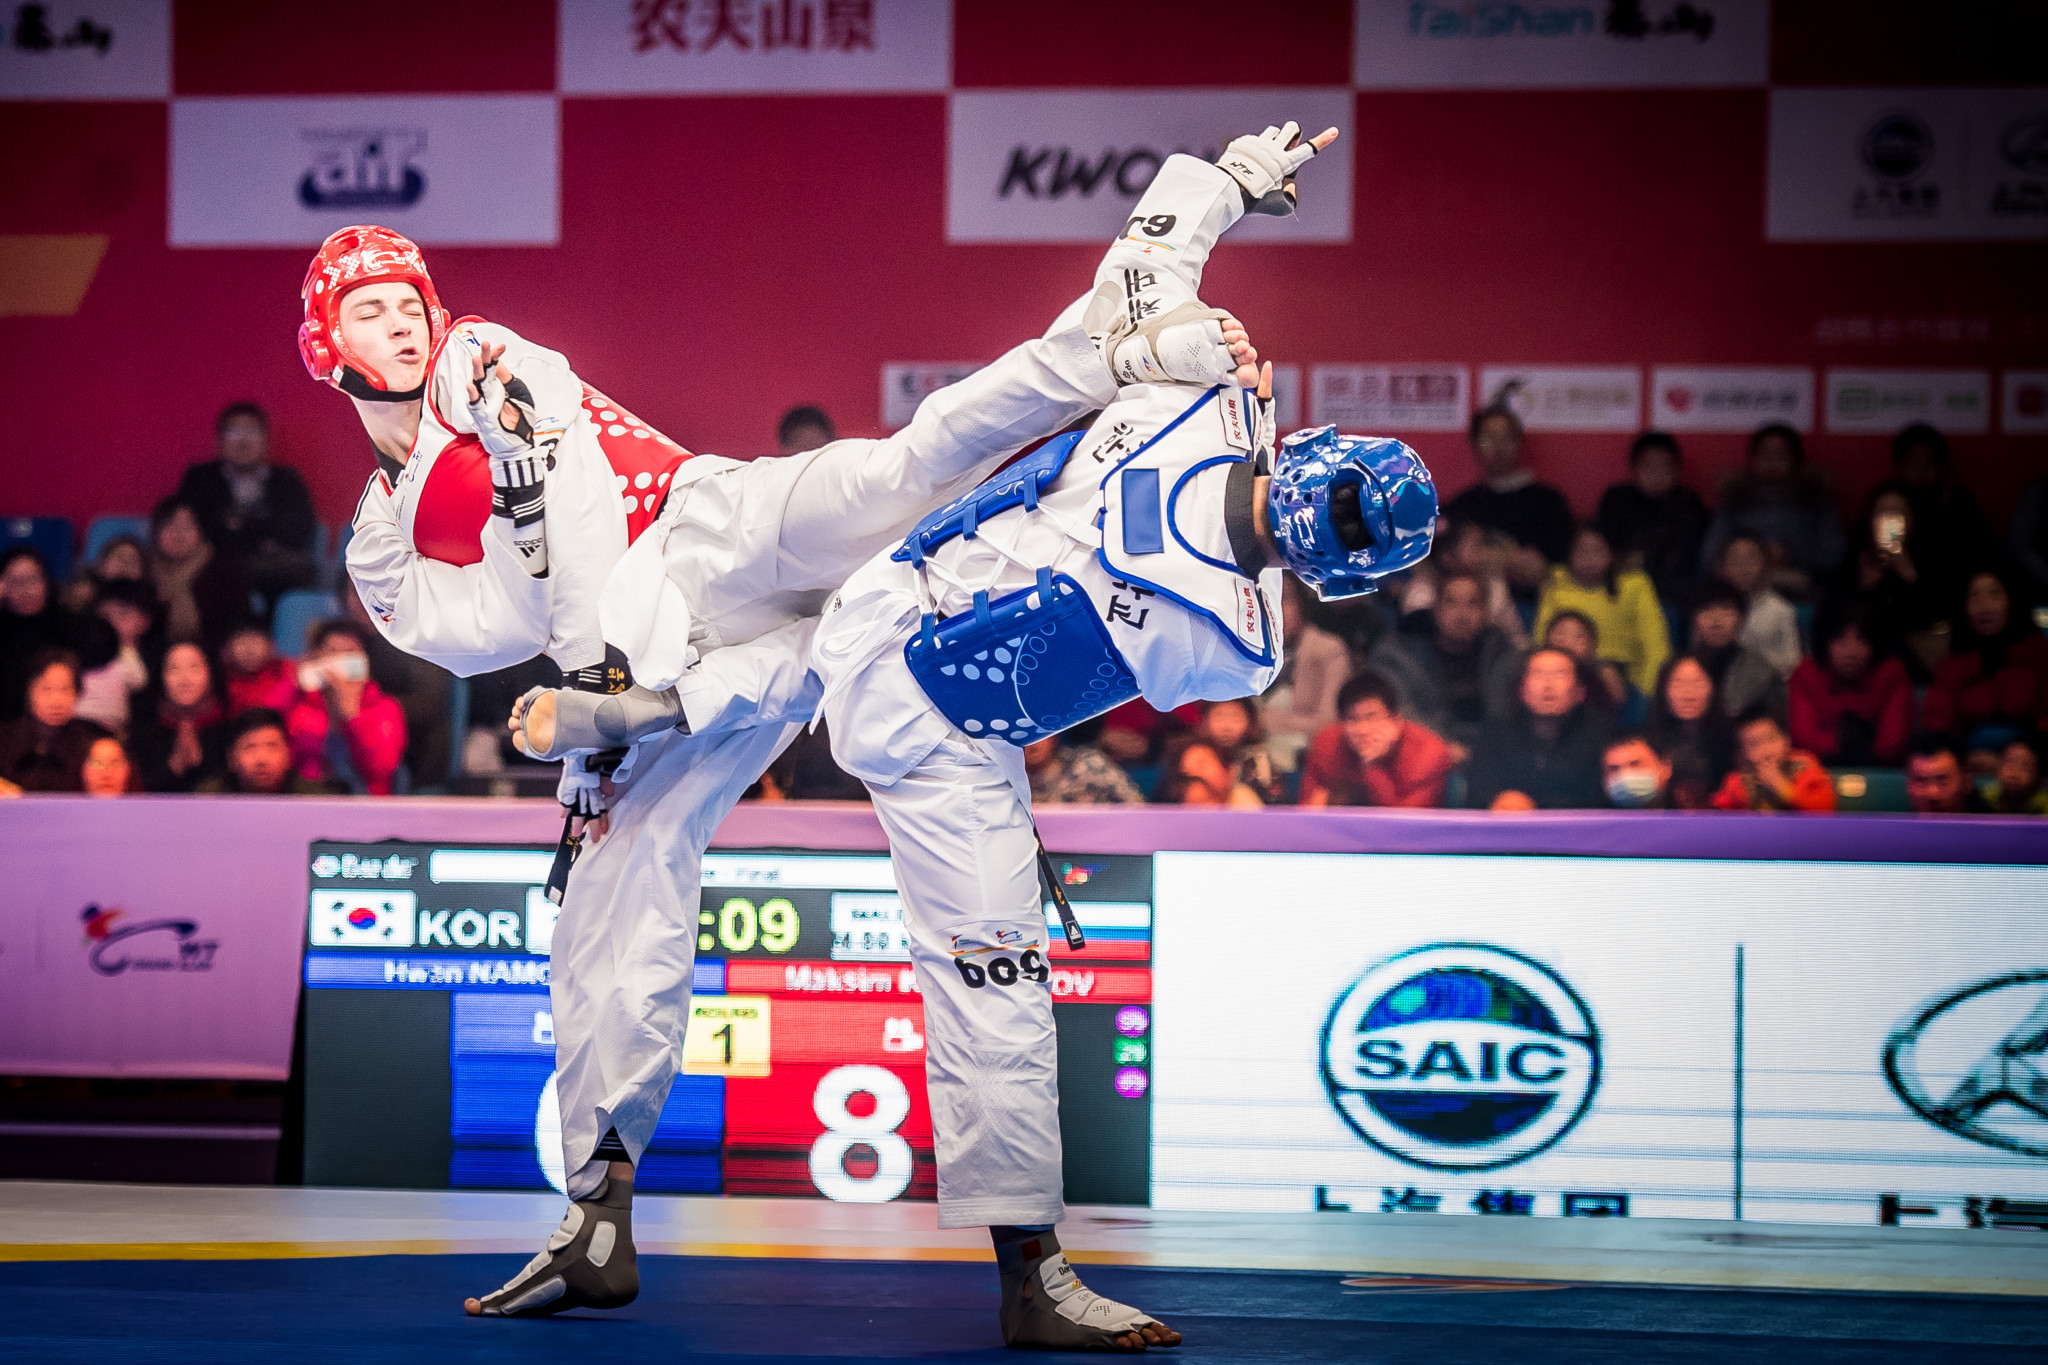 Khramtcov came out on top in the men's under 80kg division with a 35-29 win over South Korea’s Hwan Namgoong ©World Taekwondo